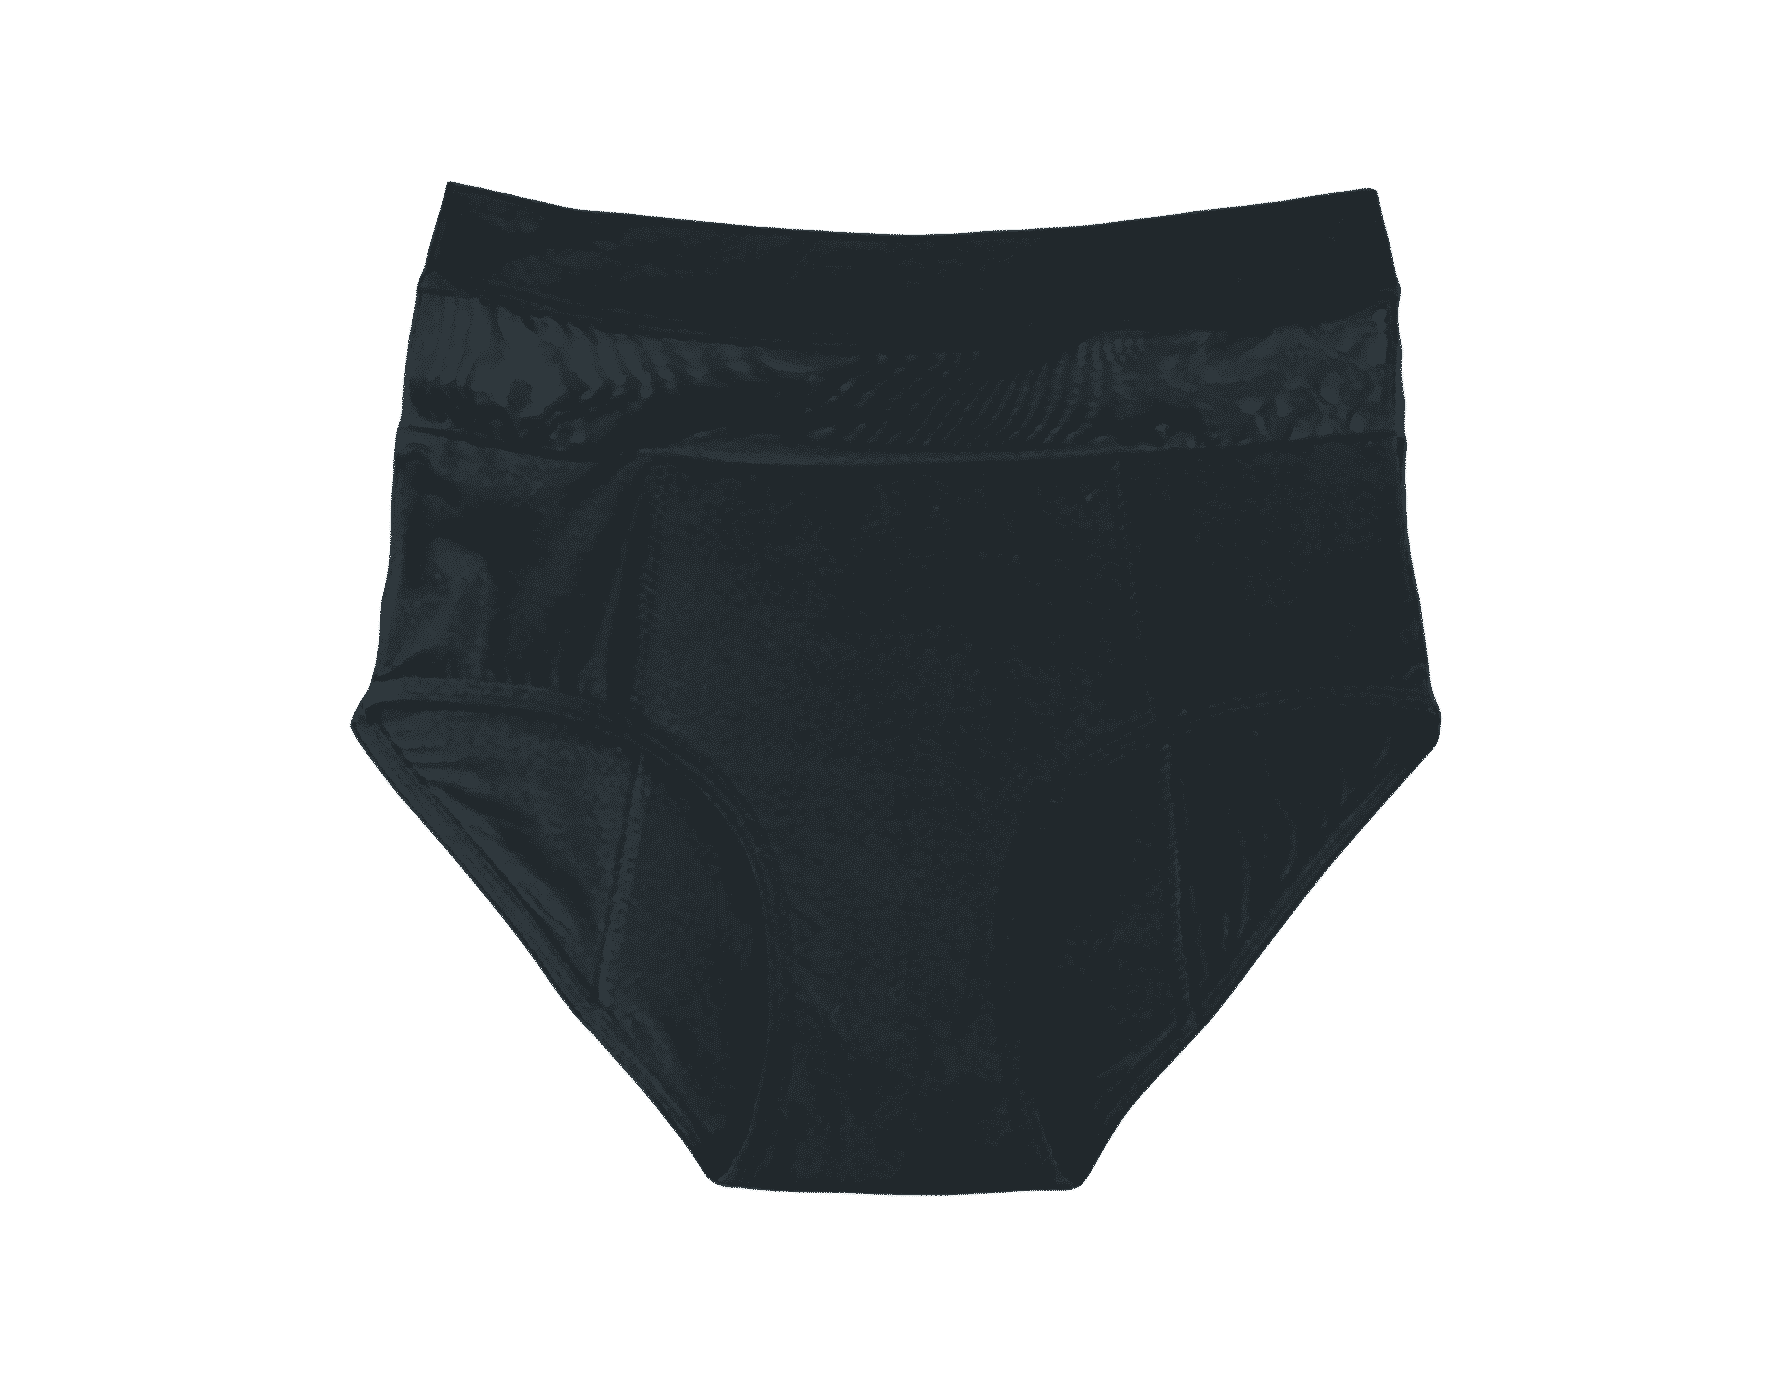 Goat Union Overnight Period Underwear for Women - Absorbent